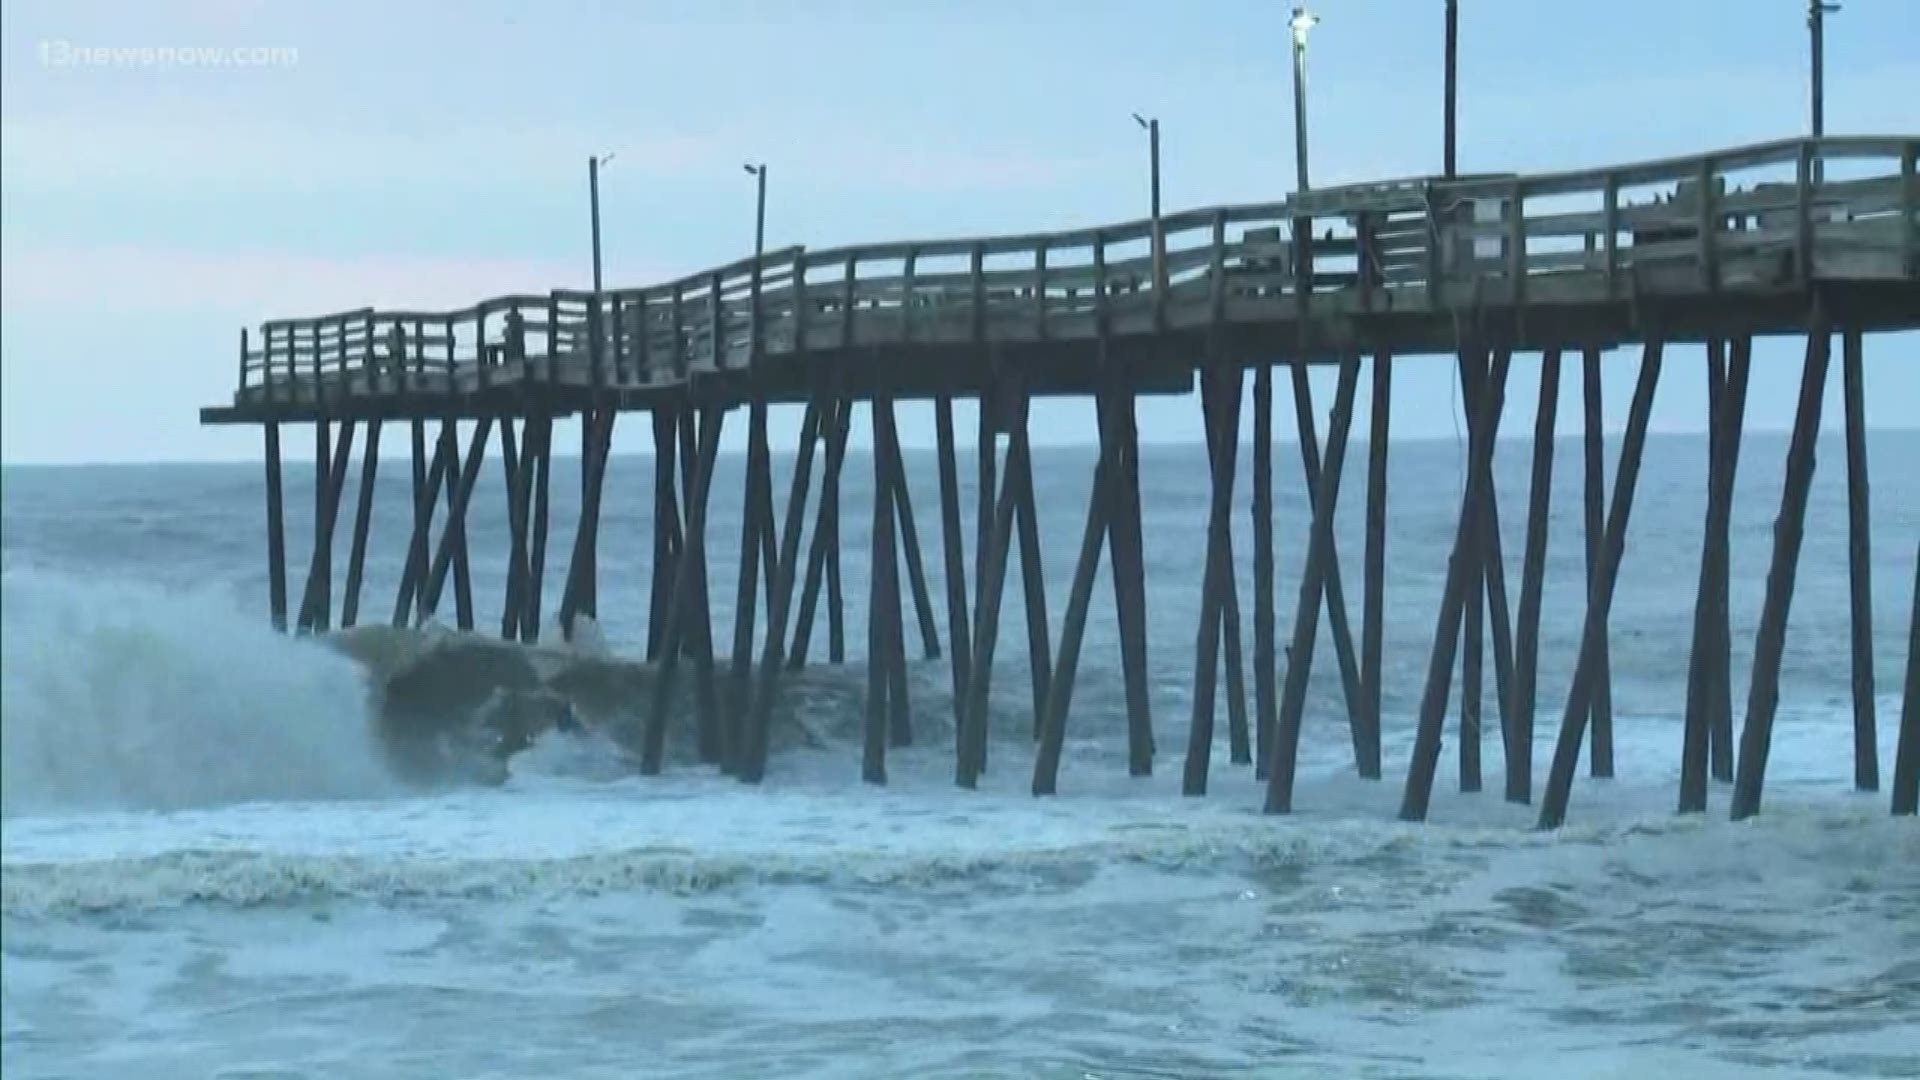 After Hurricane Dorian destroyed parts of it, the owners of the Avalon Pier posted a GoFundMe on Facebook and said they plan to rebuild. They need $100,000 to do it.